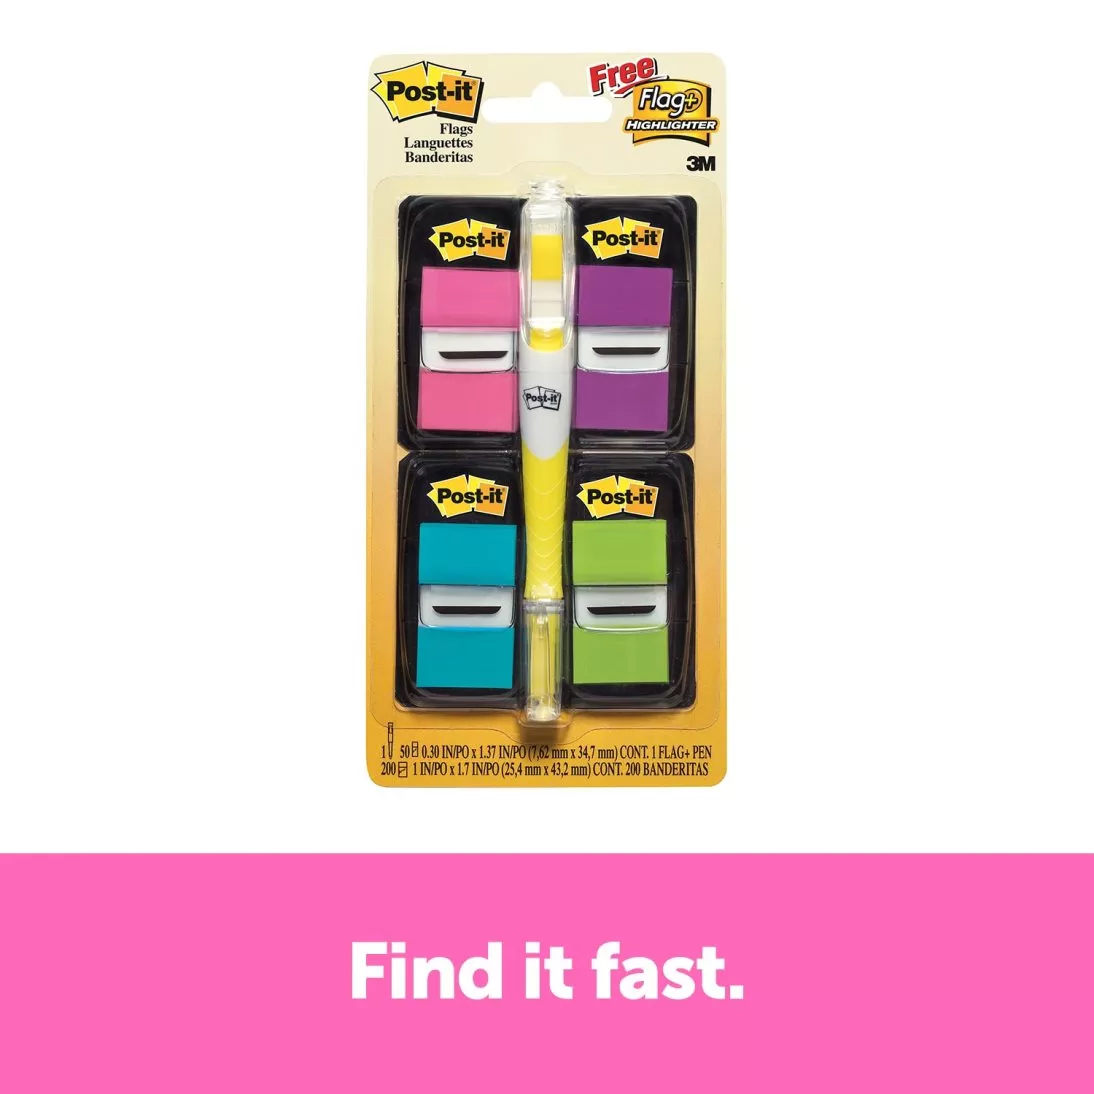 Post-it® Flags 680-PPBGVA, 1 in. x 1.7 in. (25,4 mm x 43,2 mm) Assorted
200 flags pack